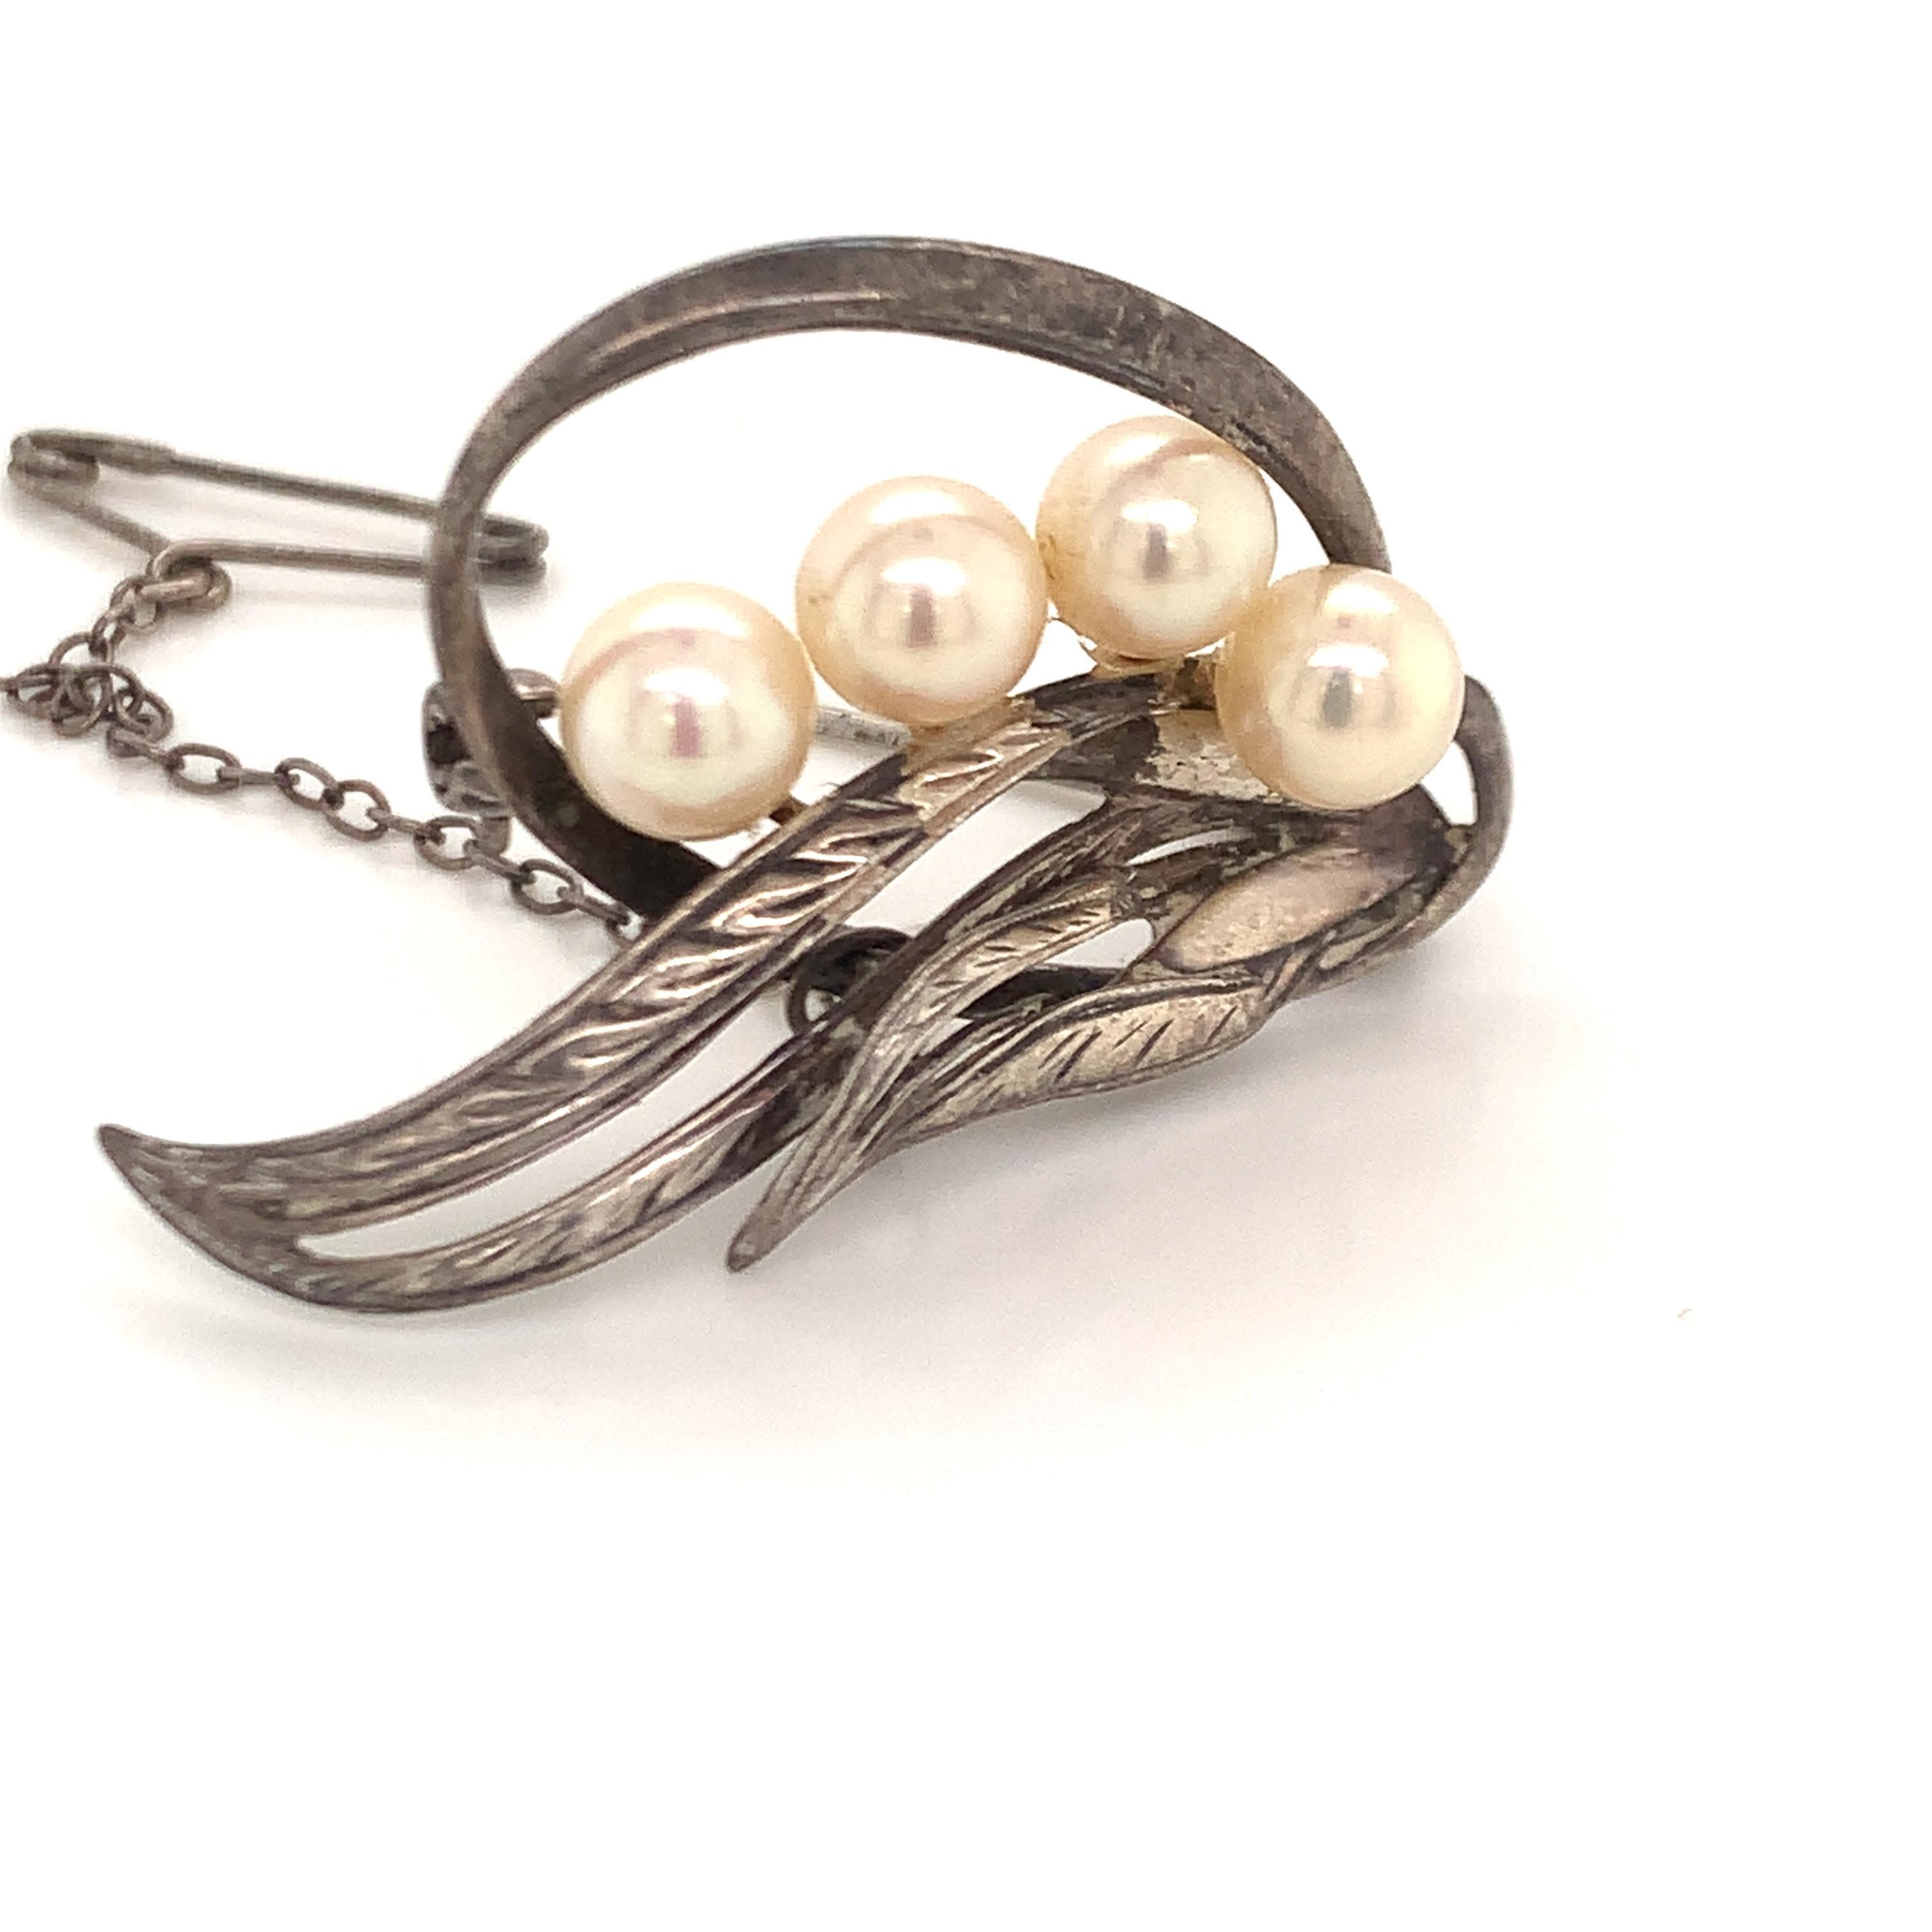 Mikimoto Estate Akoya Pearl Brooch Pin Sterling Silver 6.5 mm 5.56 Grams M199

This elegant Authentic Mikimoto Estate sterling silver brooch pin has 4 Saltwater Akoya Cultured Pearls in of 6.5 mm and have a weight of 5.56 Grams.
TRUSTED SELLER SINCE